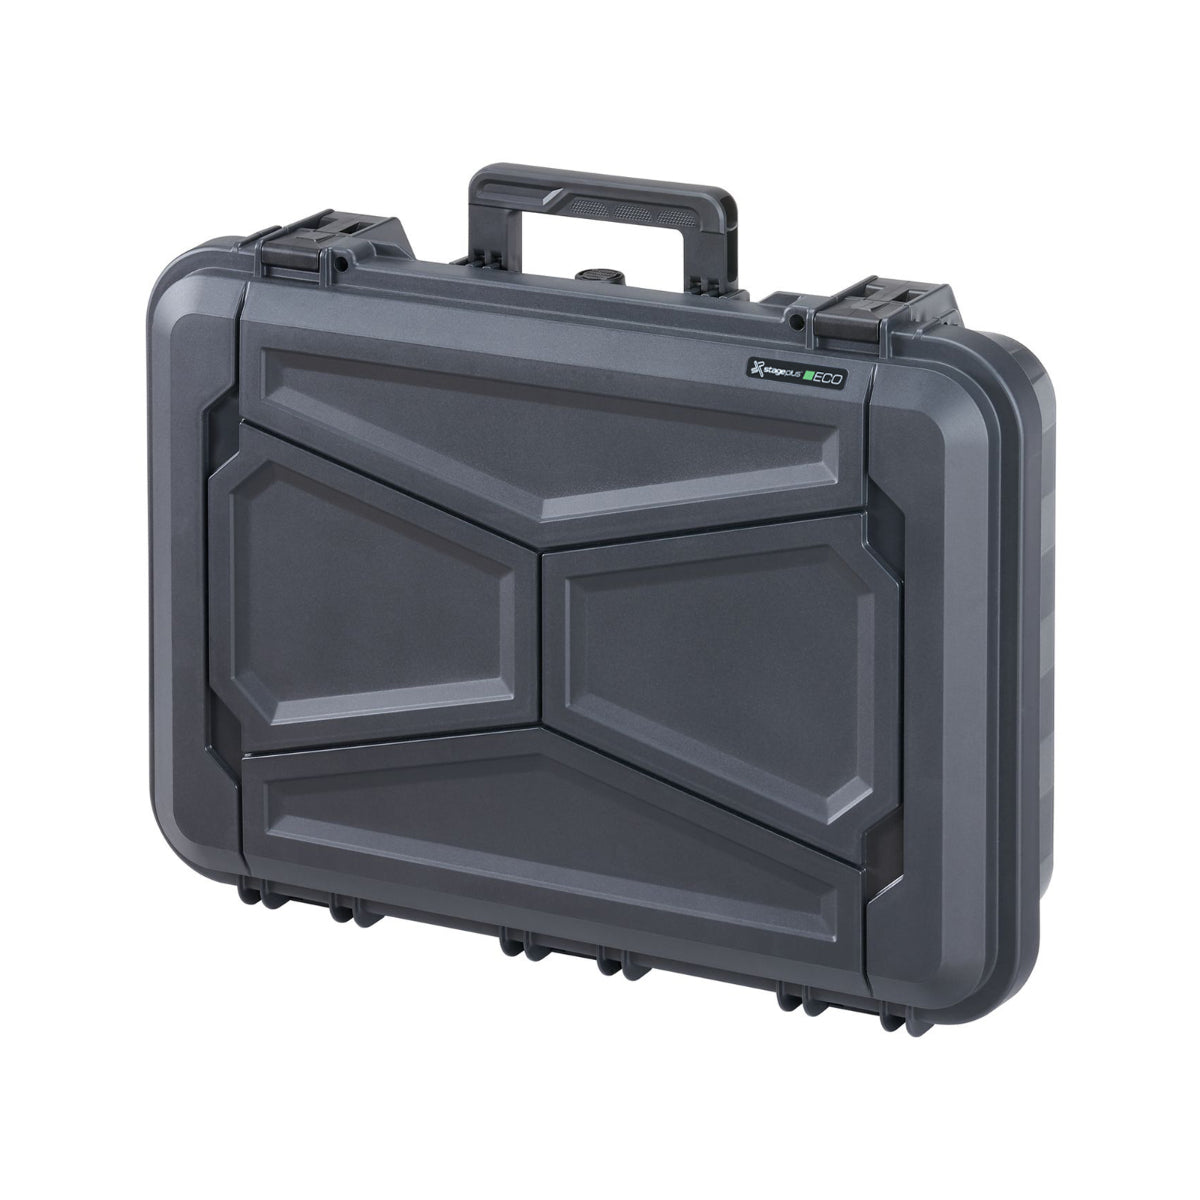 SP ECO 90S Grey Carry Case, Cubed Foam, ID: L520xW350xH125mm